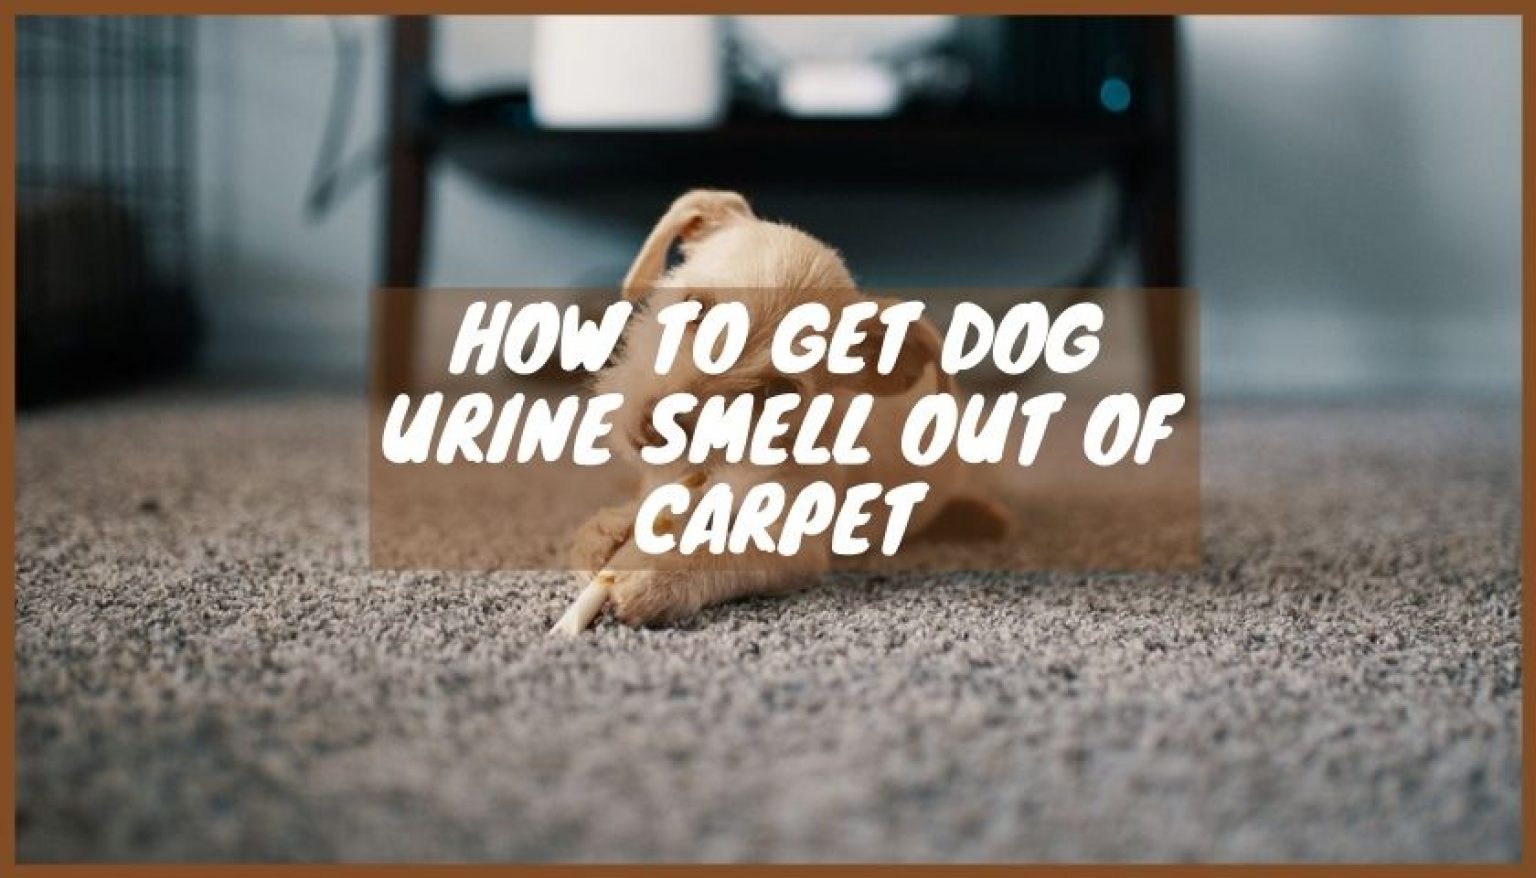 How to Get Dog Urine Smell Out of Carpet | 3 Effective Ways - How To Get Dog Pee Smell Out Of Carpet